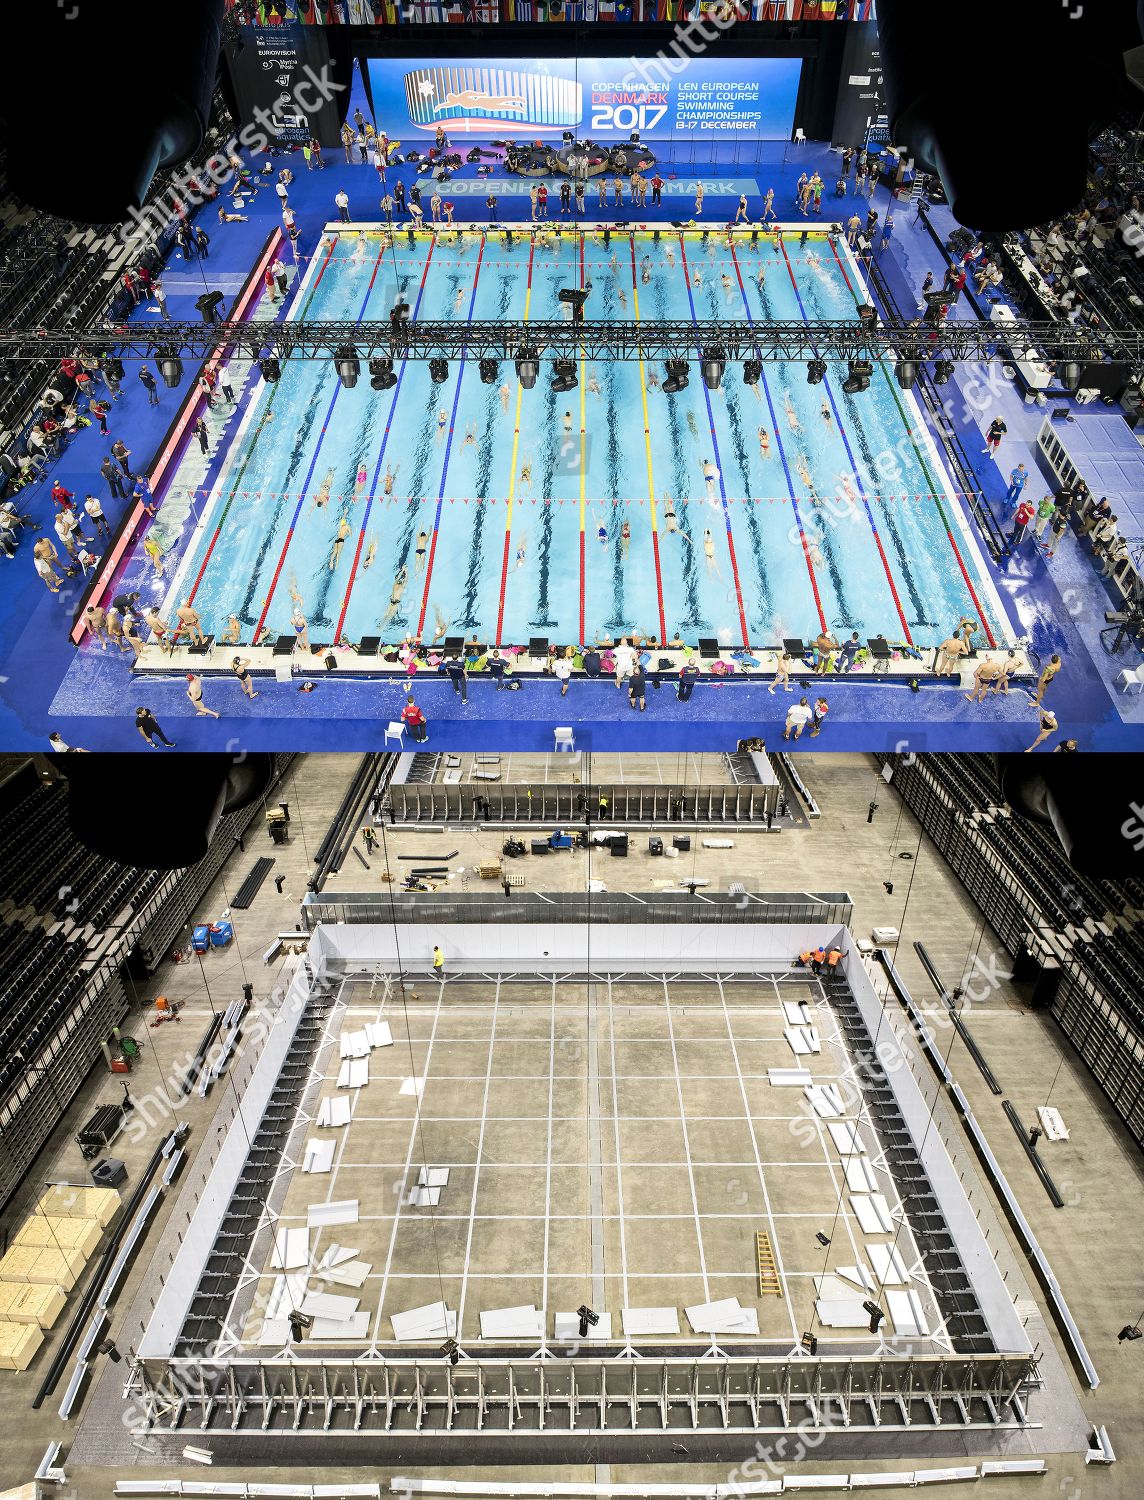 Slime mørkere Asien composite picture shows competition pool Royal Arena Editorial Stock Photo  - Stock Image | Shutterstock